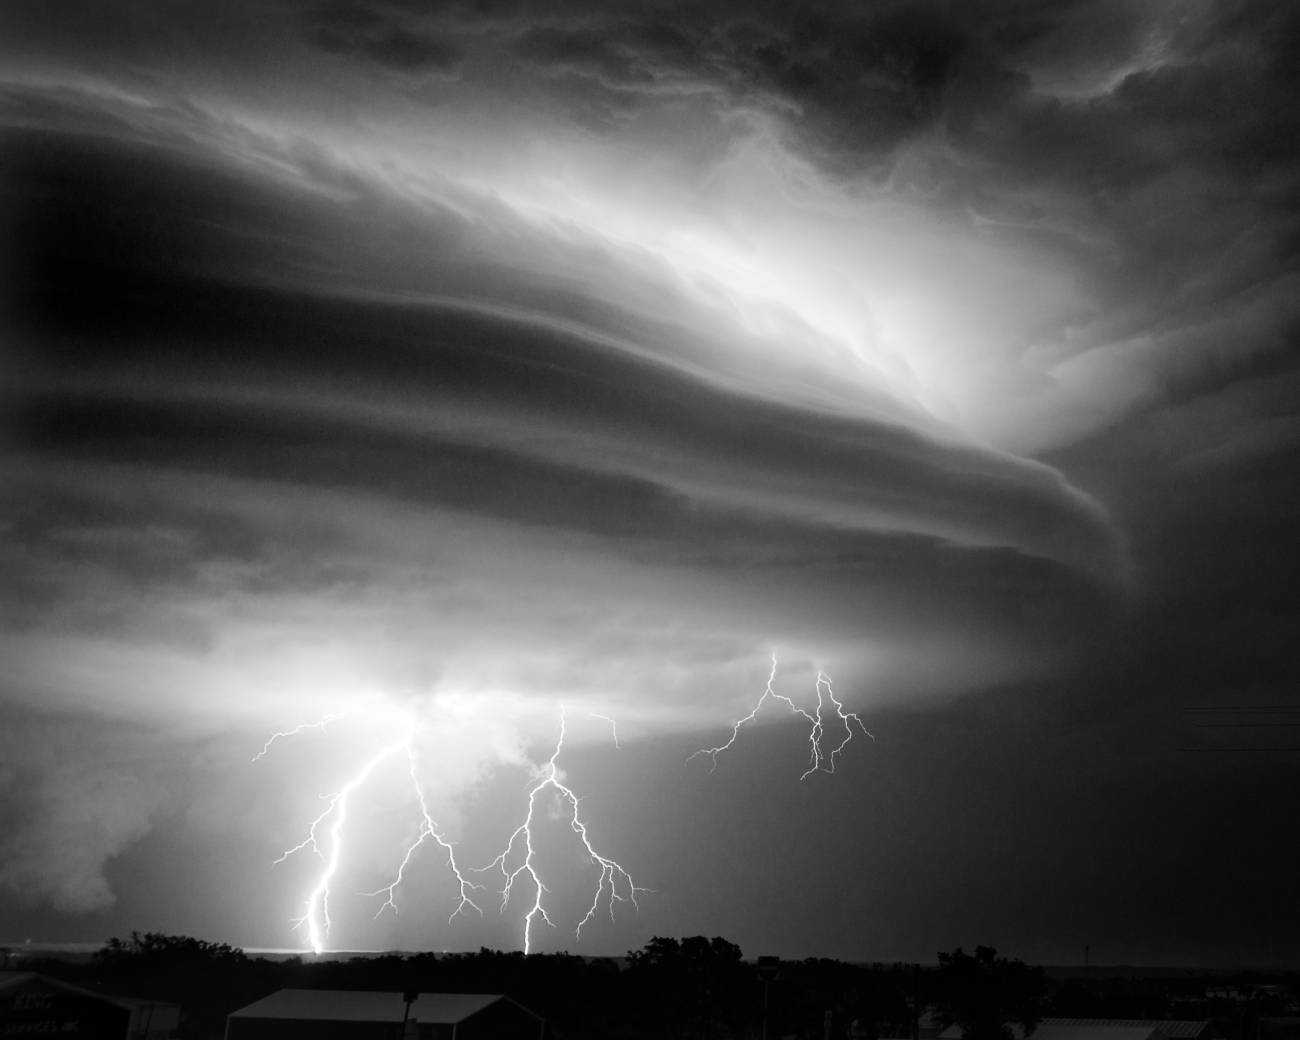 Lightning strikes during a severe storm near Canadian, Texas